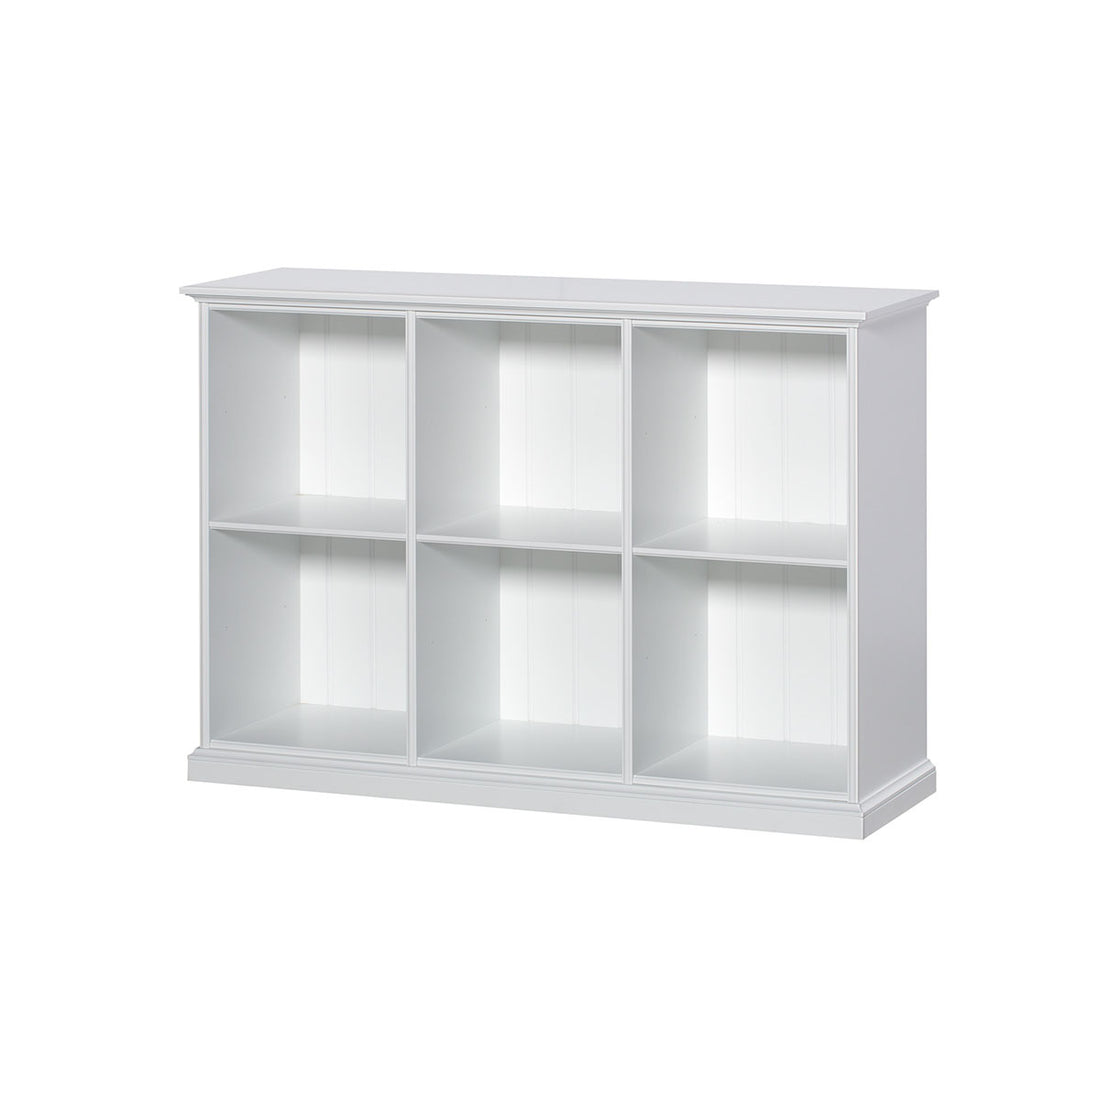 oliver-furniture-seaside-shelving-unit-low-cabinet-with-6-rooms- (2)